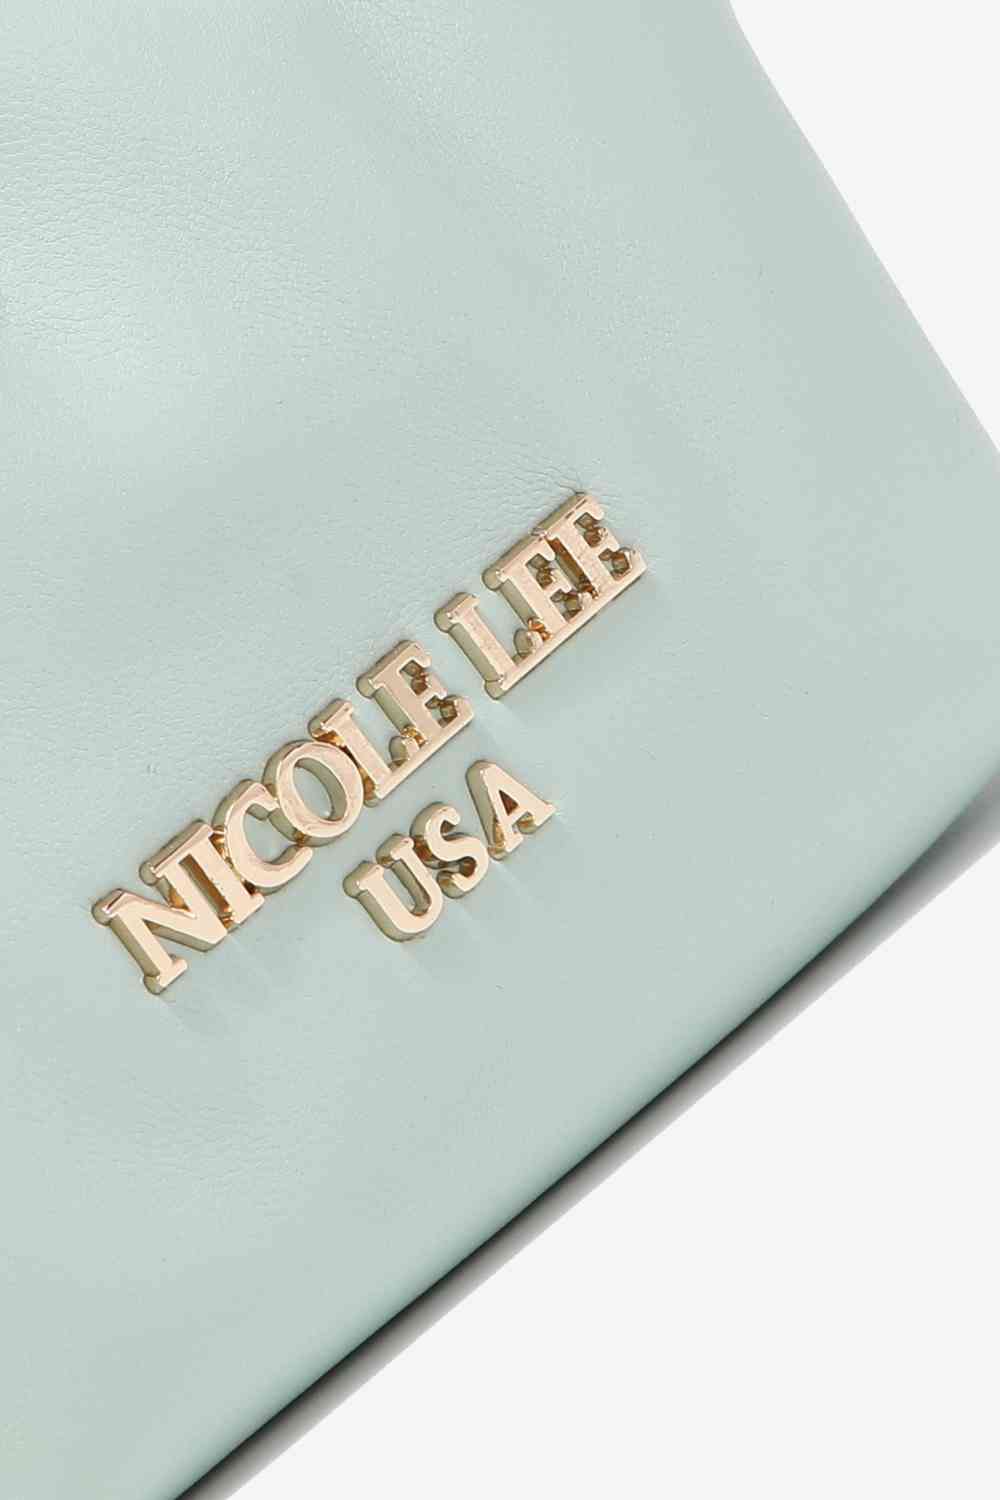 Mint Ladies Luxurious Chic Faux Leather Pouch close up view